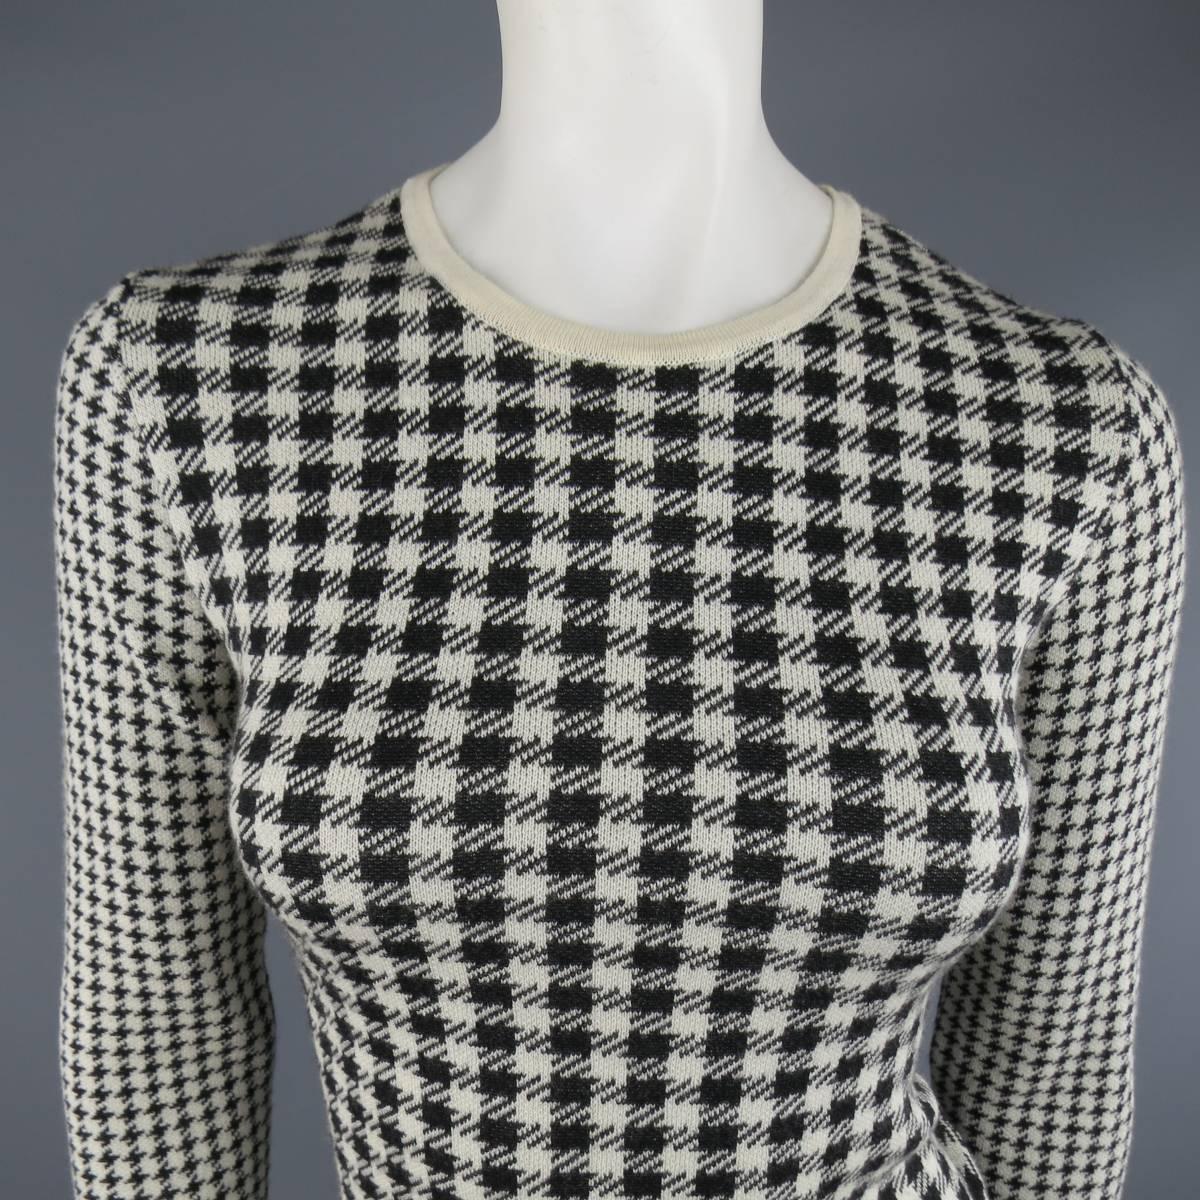 Vintage YOHJI YAMAMOTO pullover sweater in a cream & black houndstooth print wool featuring a crewneck and contrast printed sleeves. Made in Japan.
 
Excellent Pre-Owned Condition.
Marked: JP 3
 
Measurements:
 
Shoulder: 15 in.
Bust: 39 in.
Sleeve: